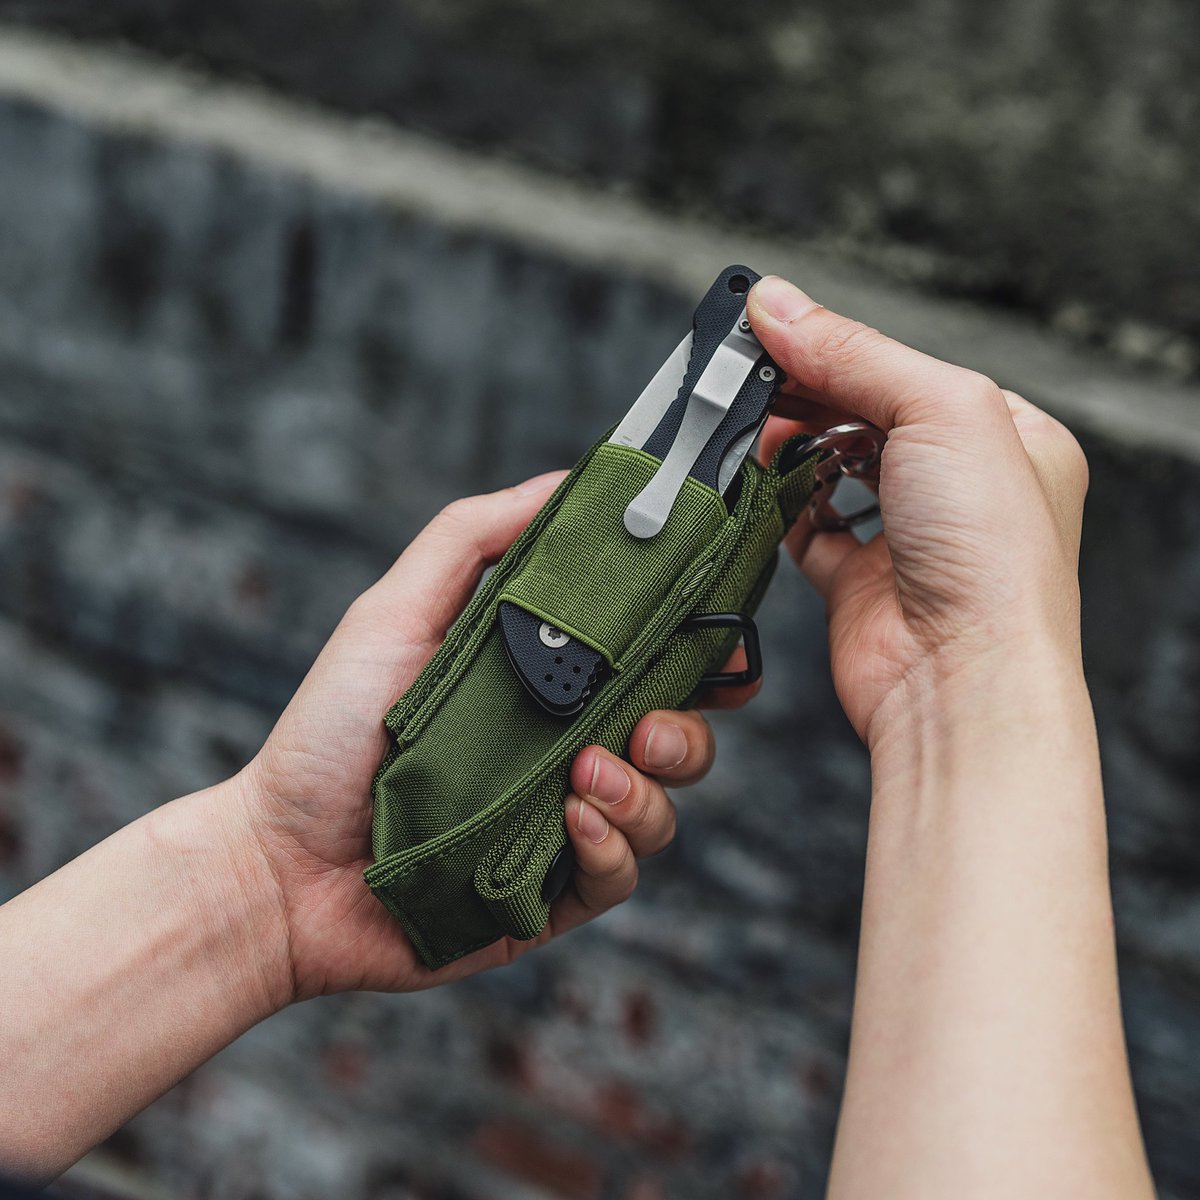 This tactical pouch is just the right size for keeping the smaller items secure and handy. 
#edc 
#edcstuff 
#edcphotography 
#edcgear 
#edccommunity 
#edccarry 
#edcdump 
#edclife 
#tacticalgeek 
#edctools 
#edcdaily 
#edcpocketdump 
#edcpouch 
#multitooledc https://t.co/lo75DnhQ78